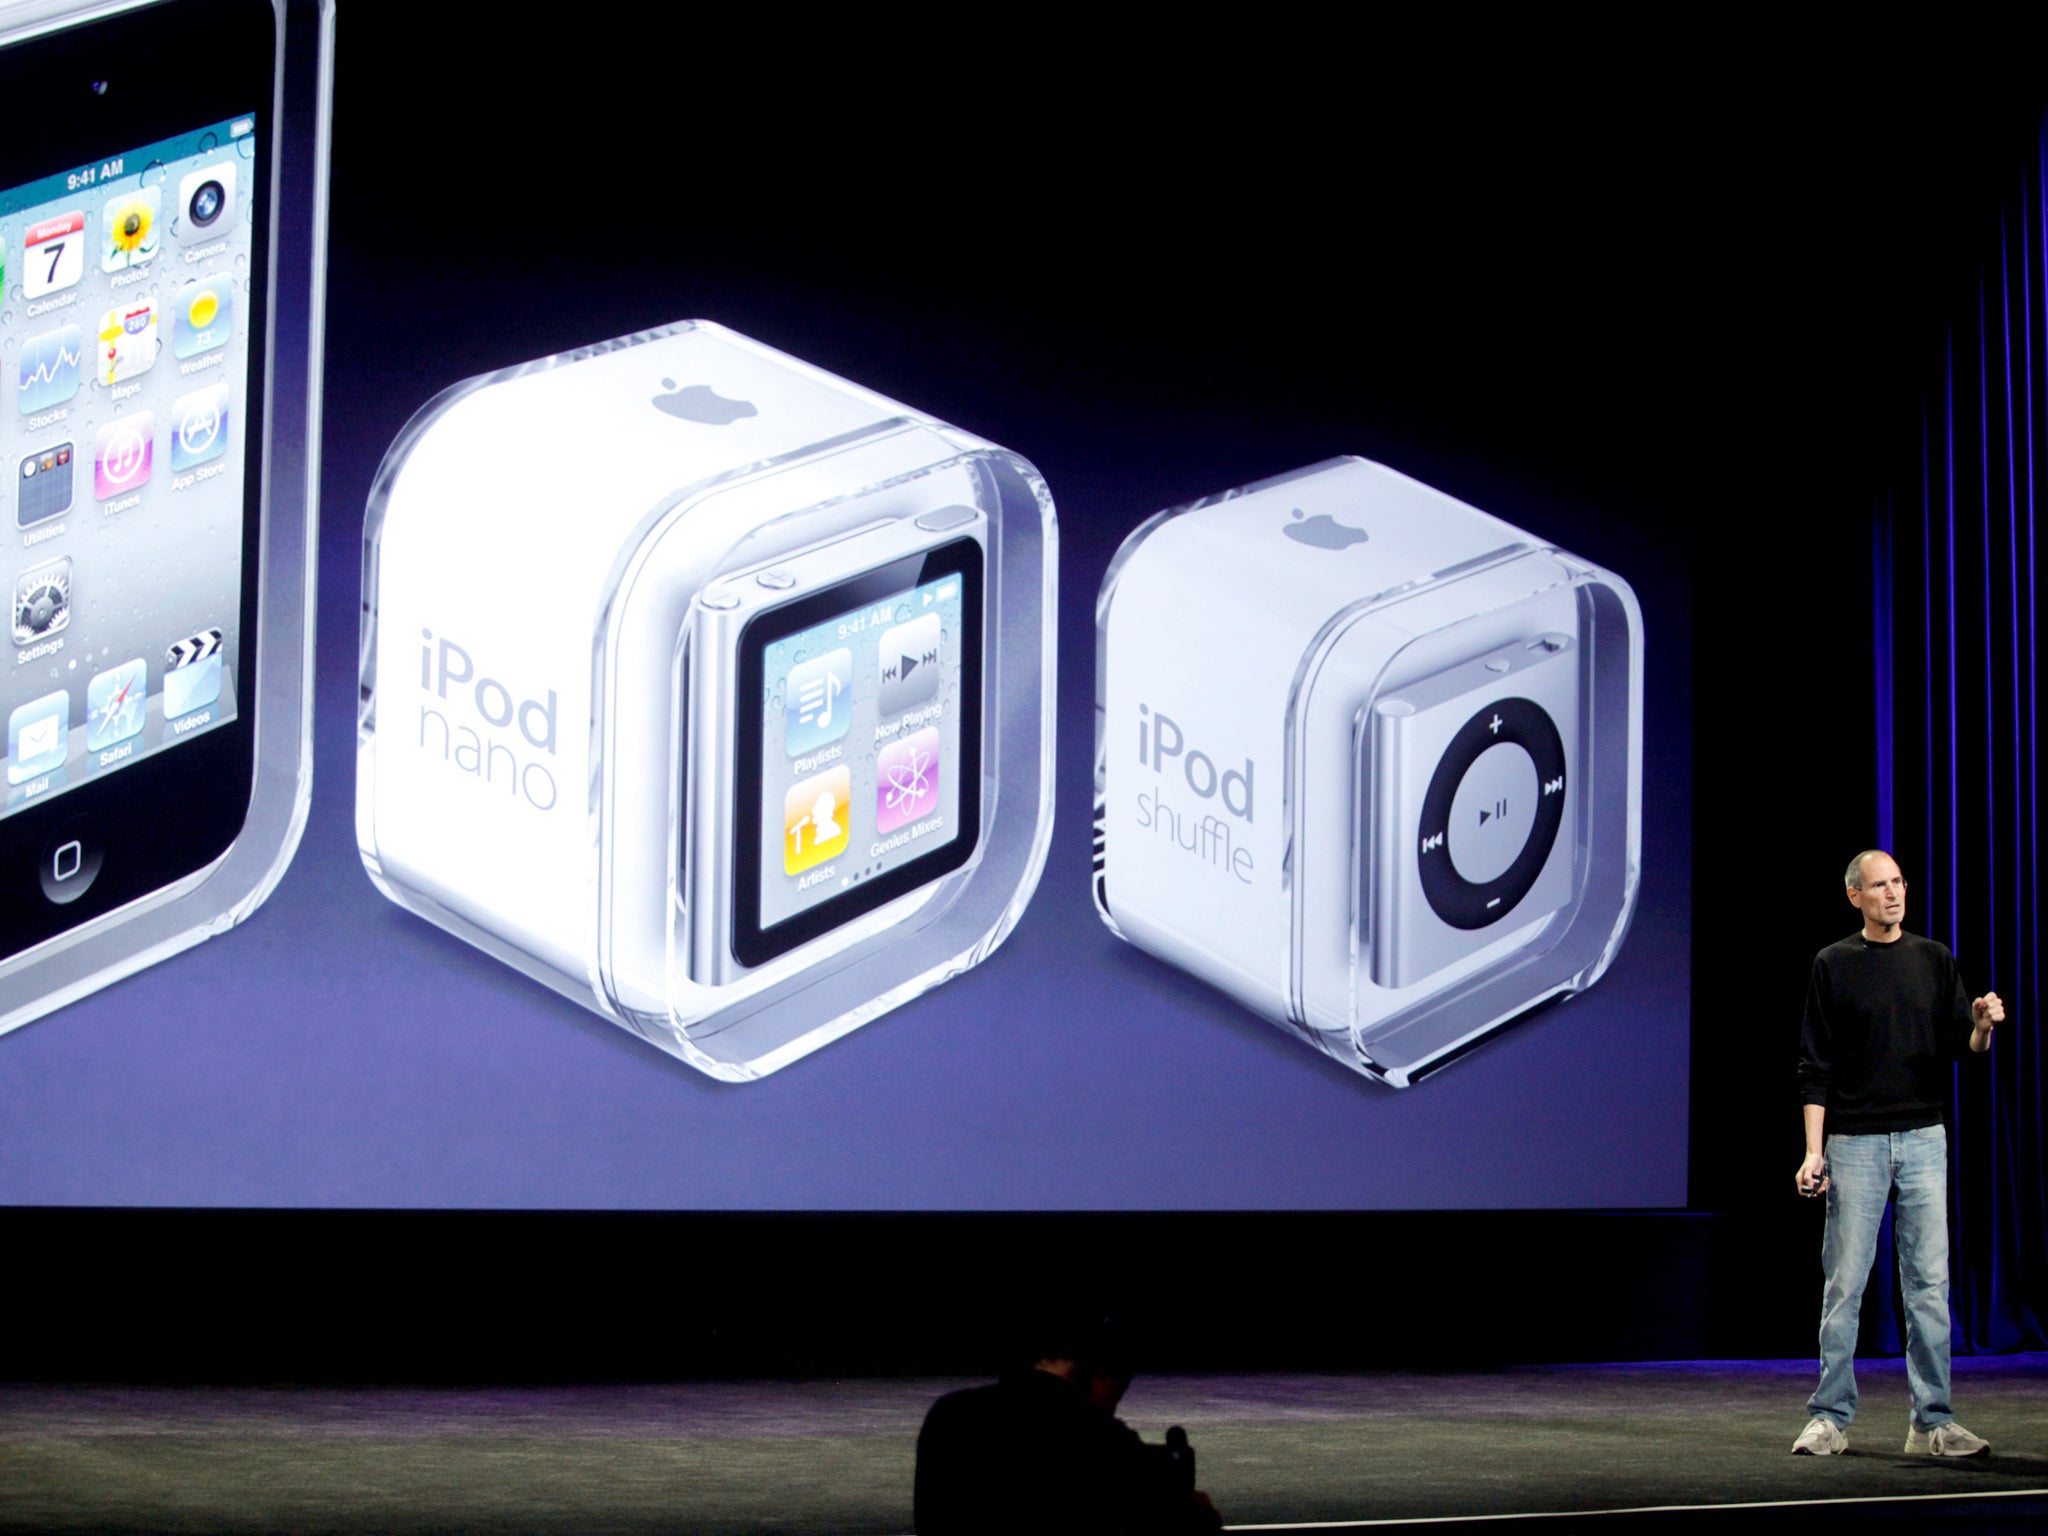 Steve Jobs announces the new iPod Nano, iPod Shuffle, iPod Touch, and iTunes at a press conference in 2010